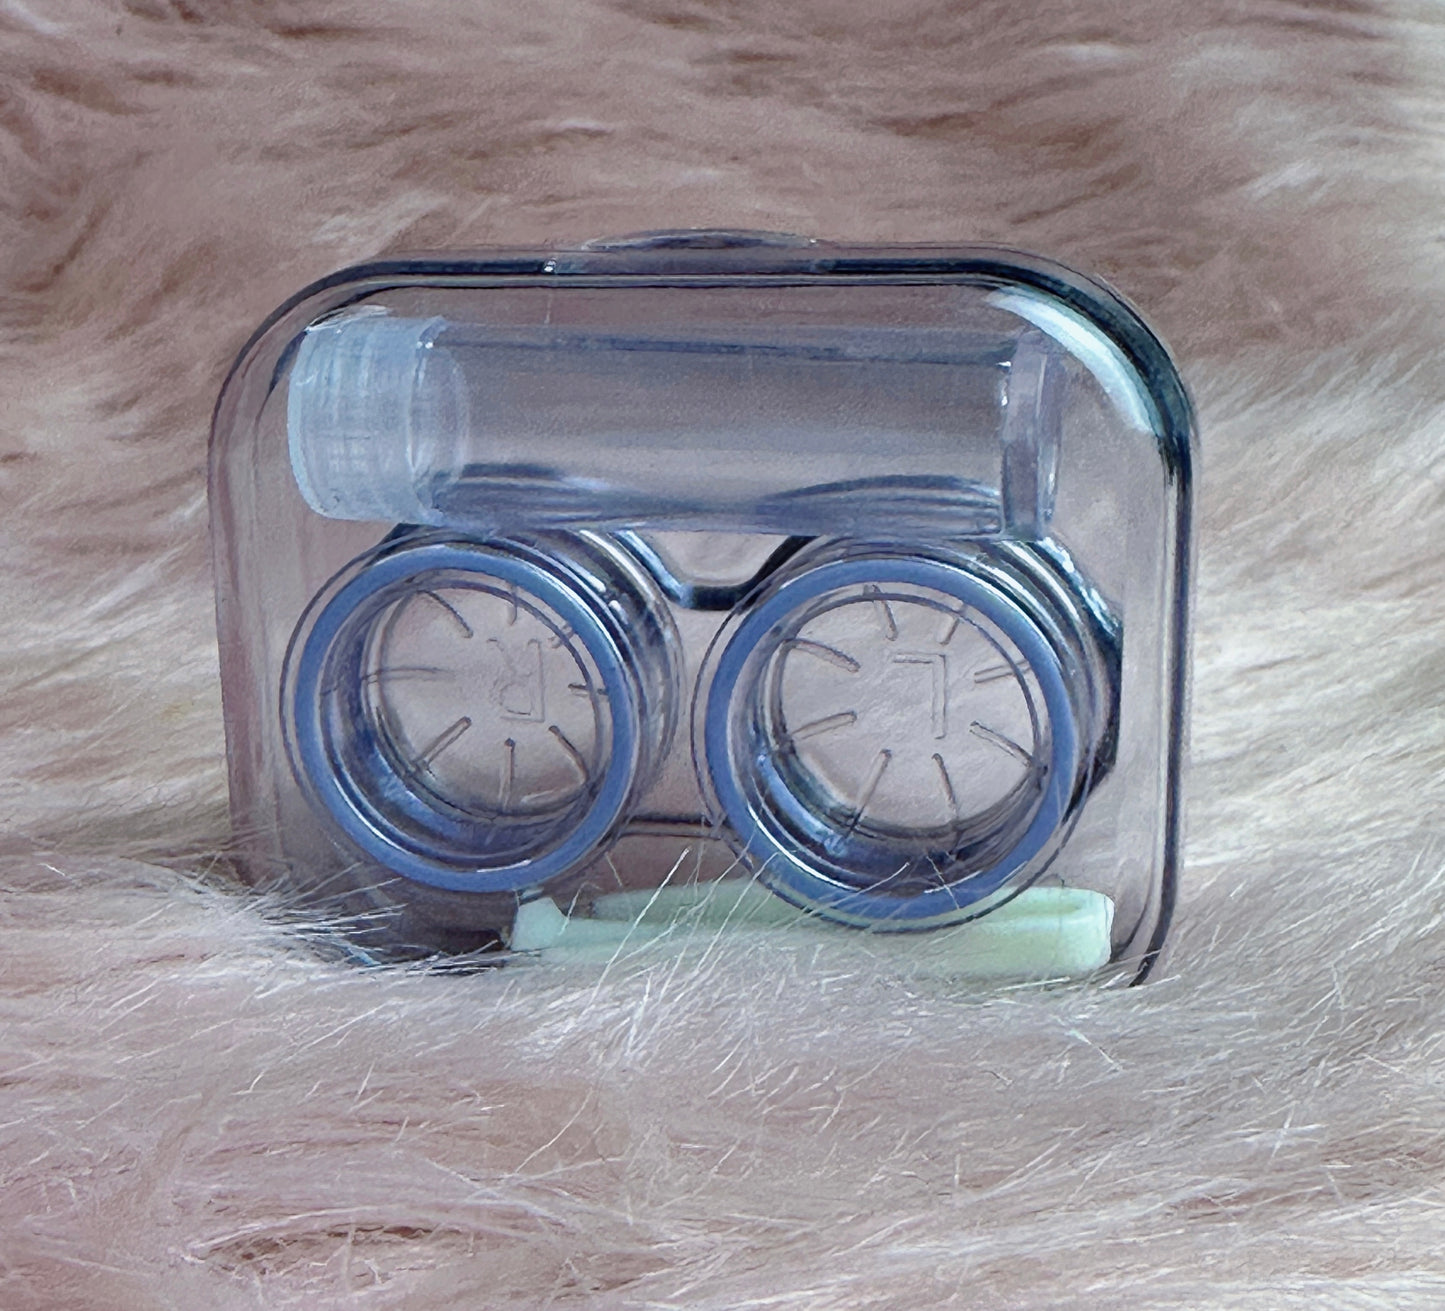 Crystal kit (kit to facilitate contact lens positions)